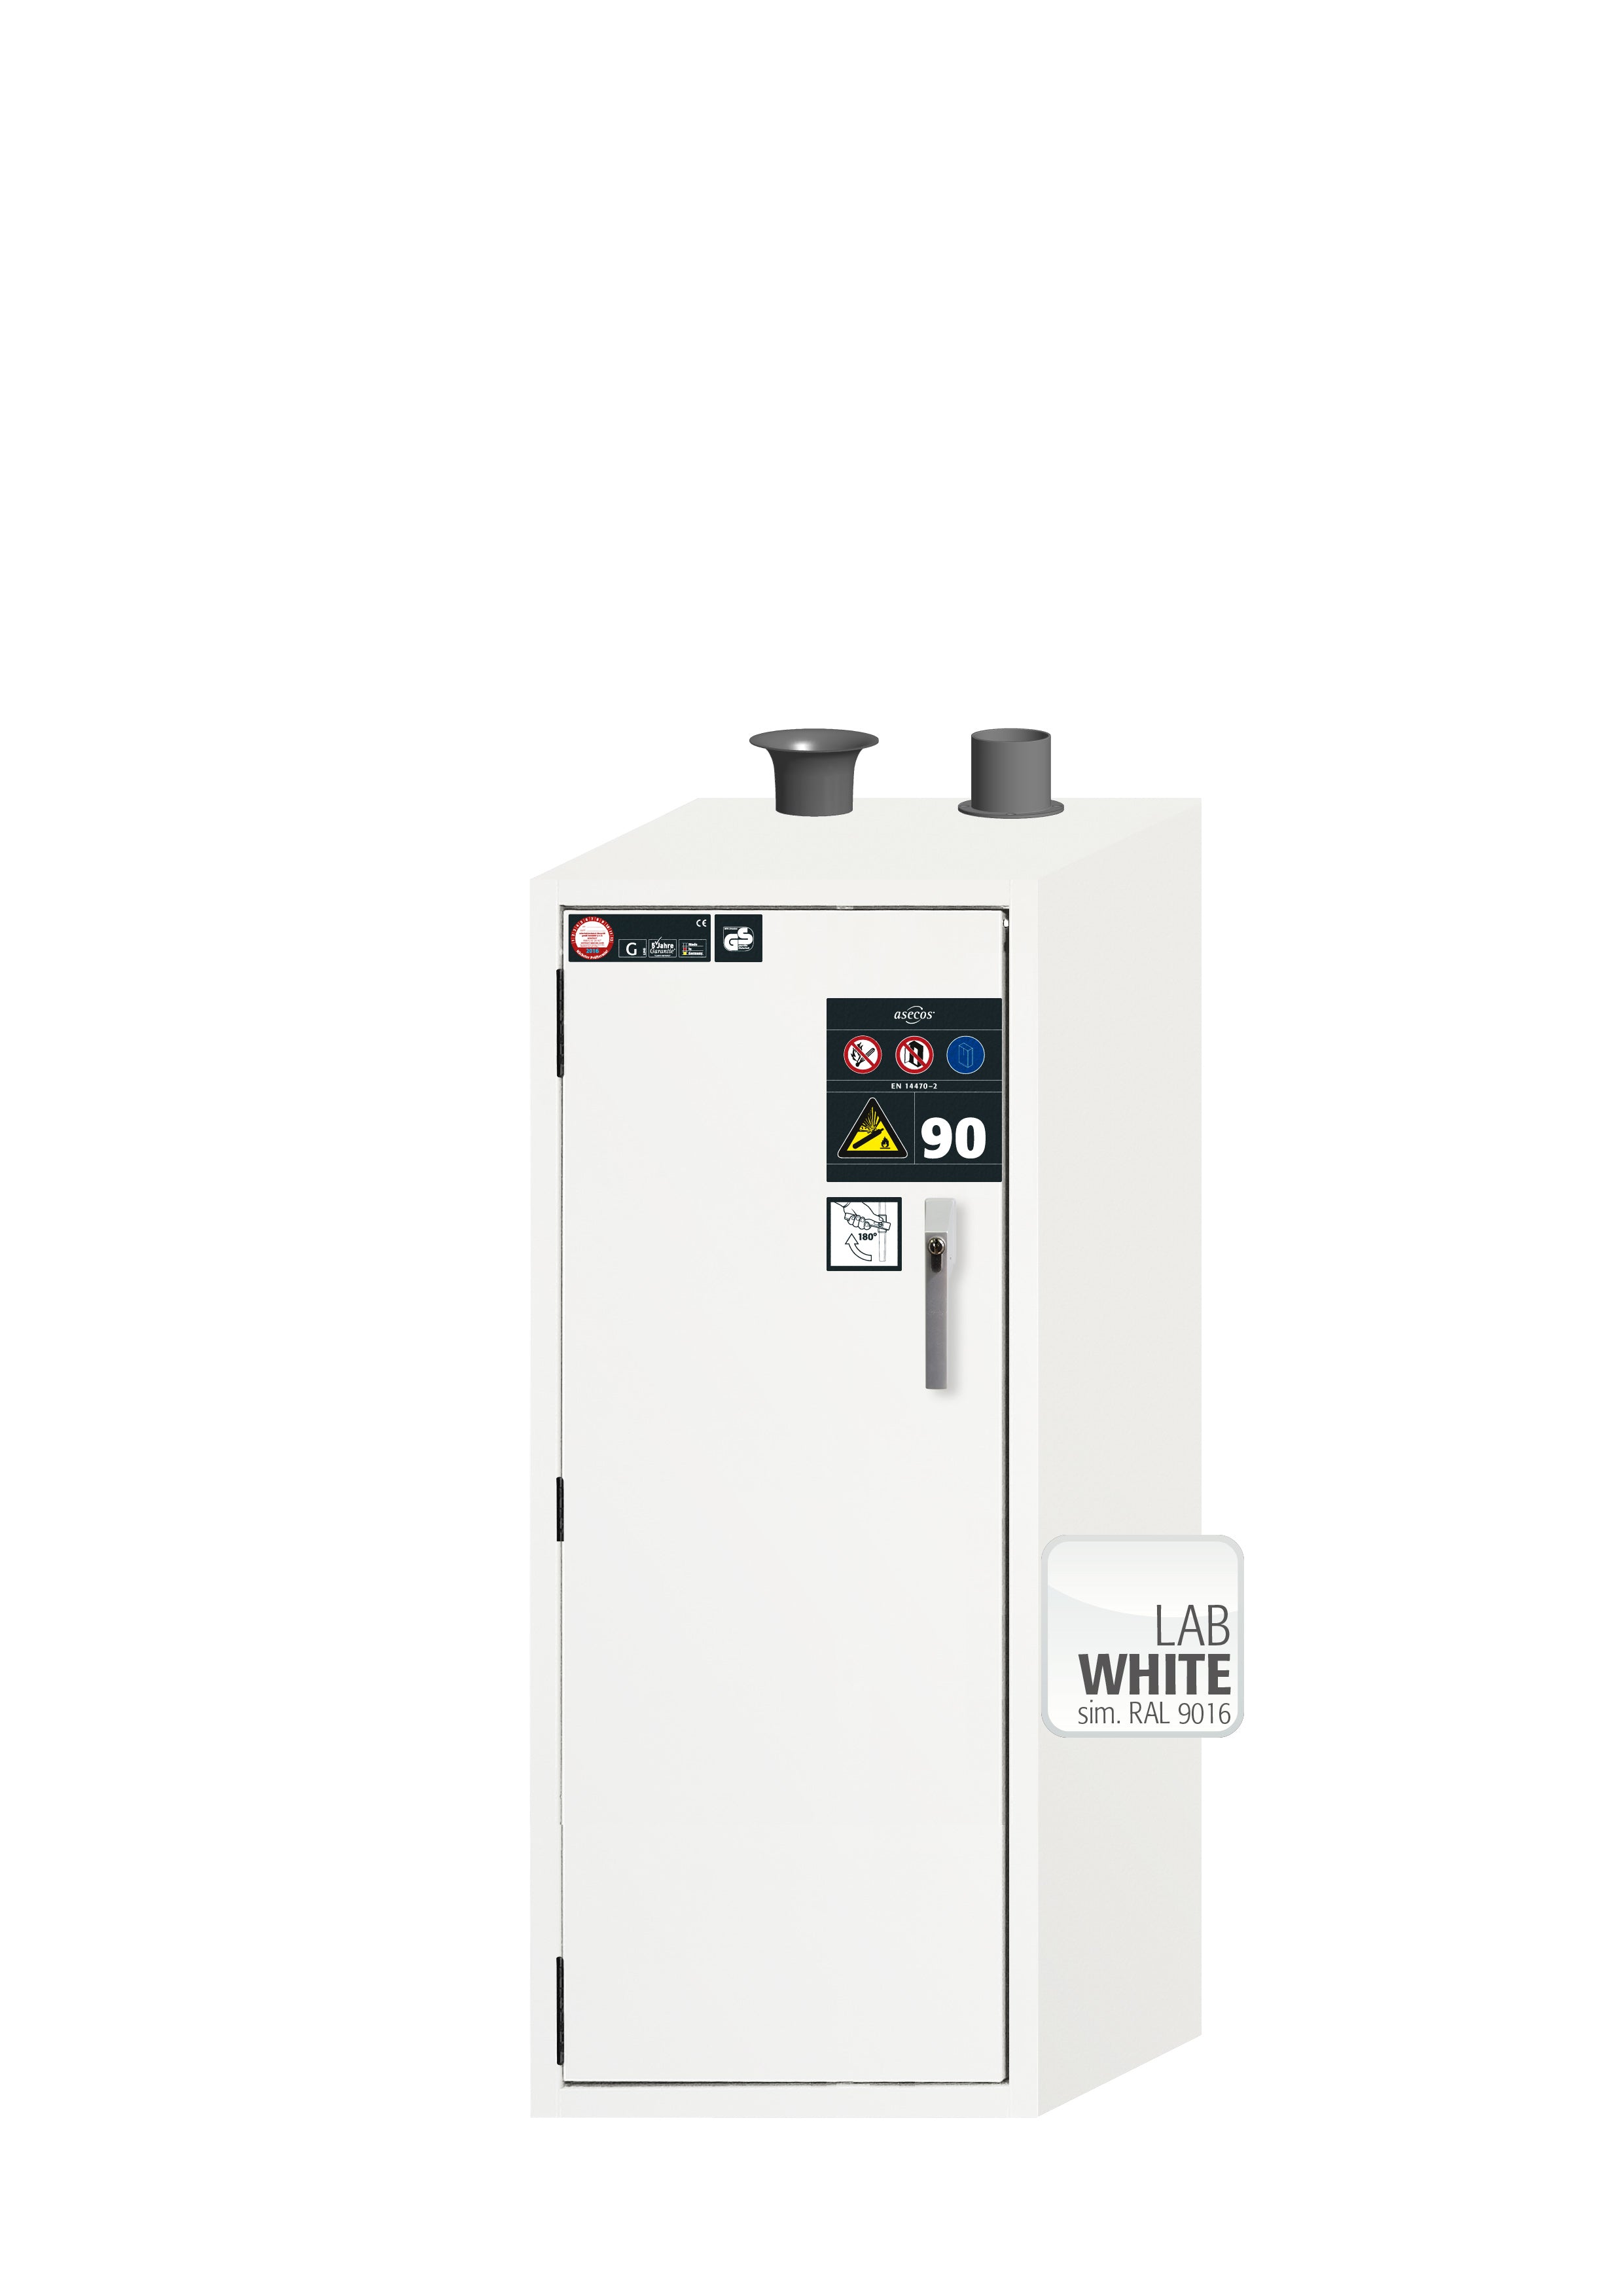 Type 90 compressed gas bottle cabinet G-ULTIMATE-90 model G90.145.060 in laboratory white (similar to RAL 9016) with for 2x compressed gas bottles of 10 liters each